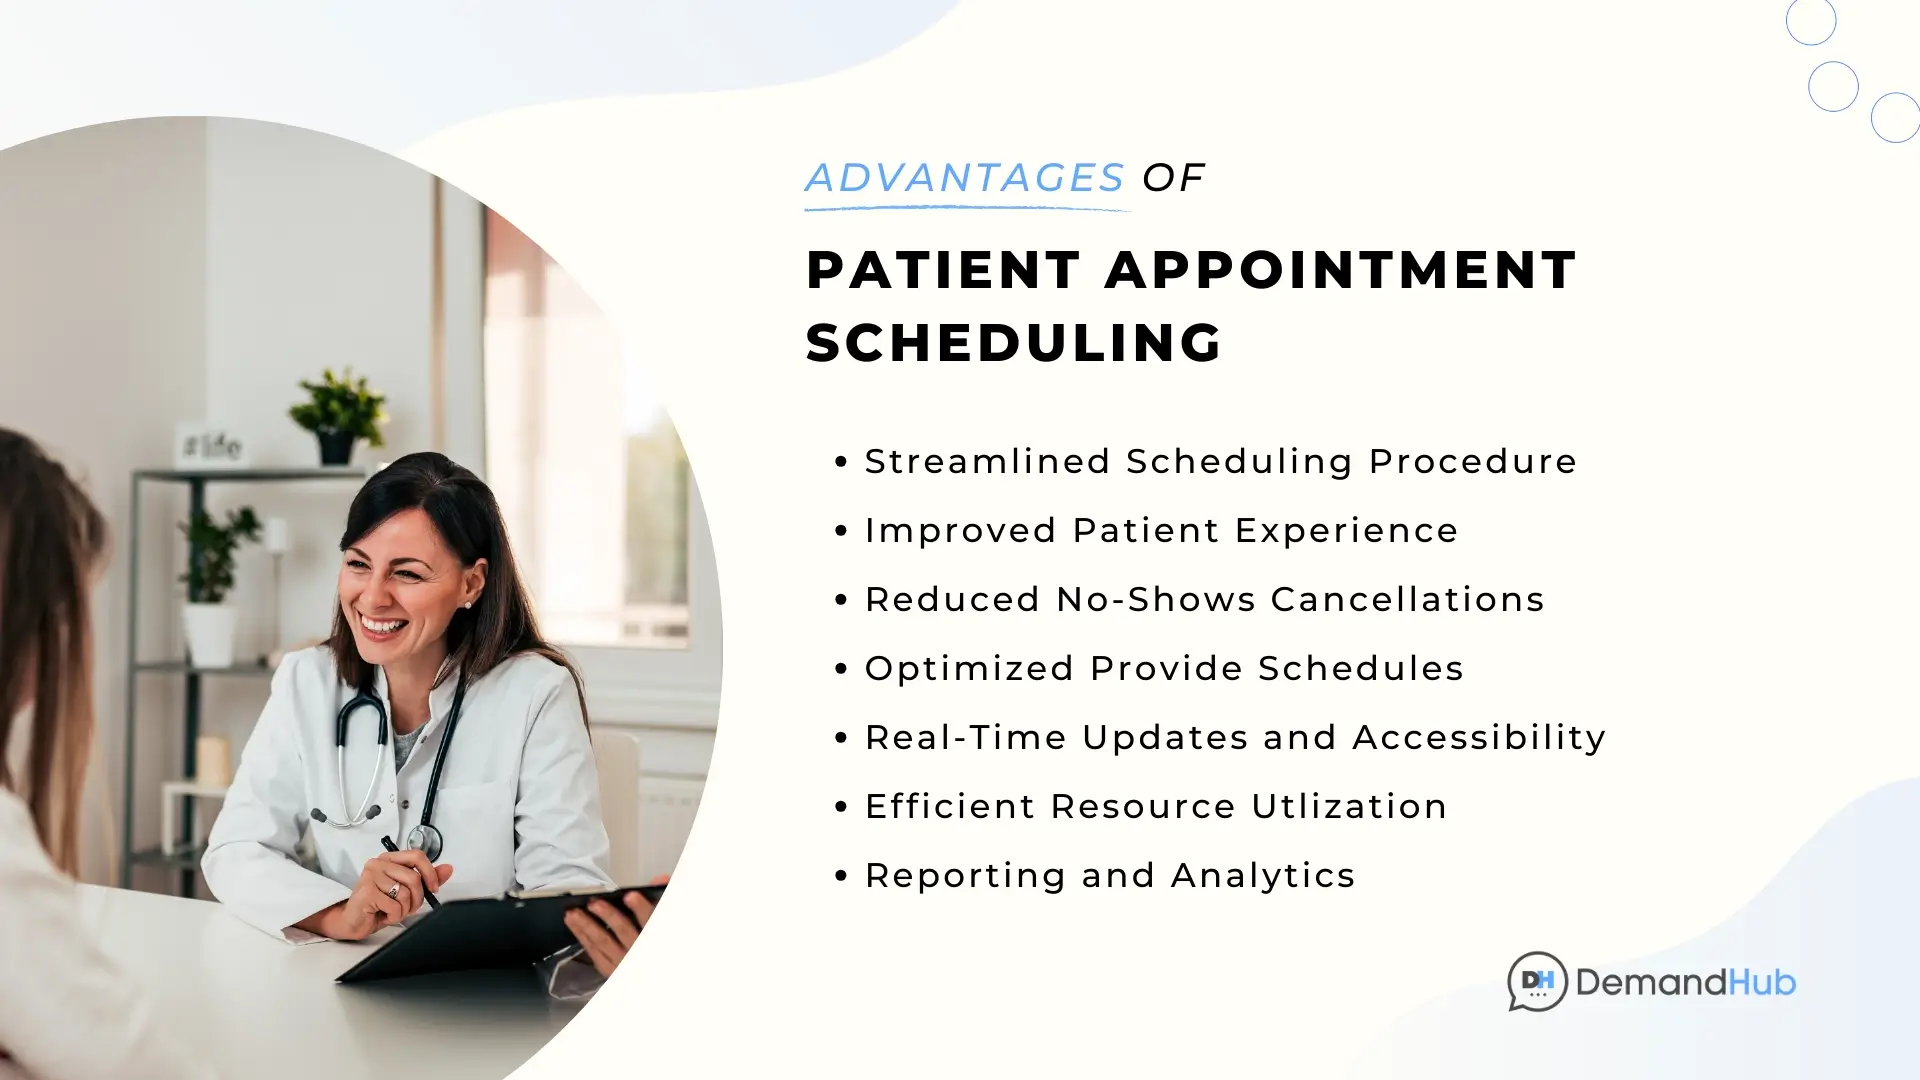 Advantages of Patient Appointment Scheduling